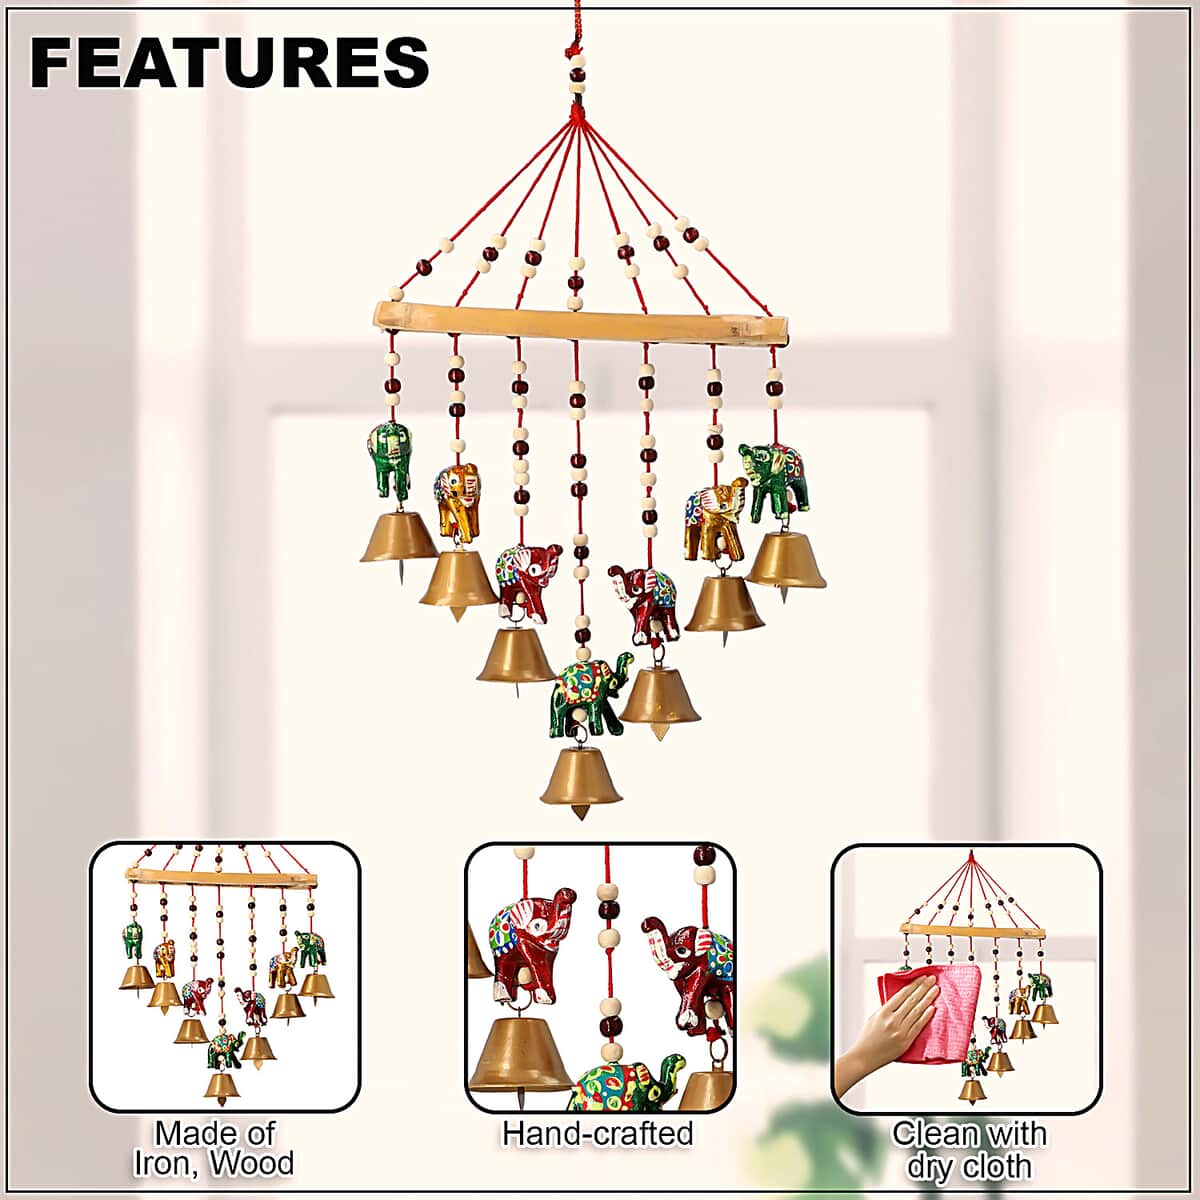 Set of 2 Home Room Decor Handcrafted Wooden Elephant Outdoor Wind Chime Big Iron Bell Noise Maker Multi Color image number 2